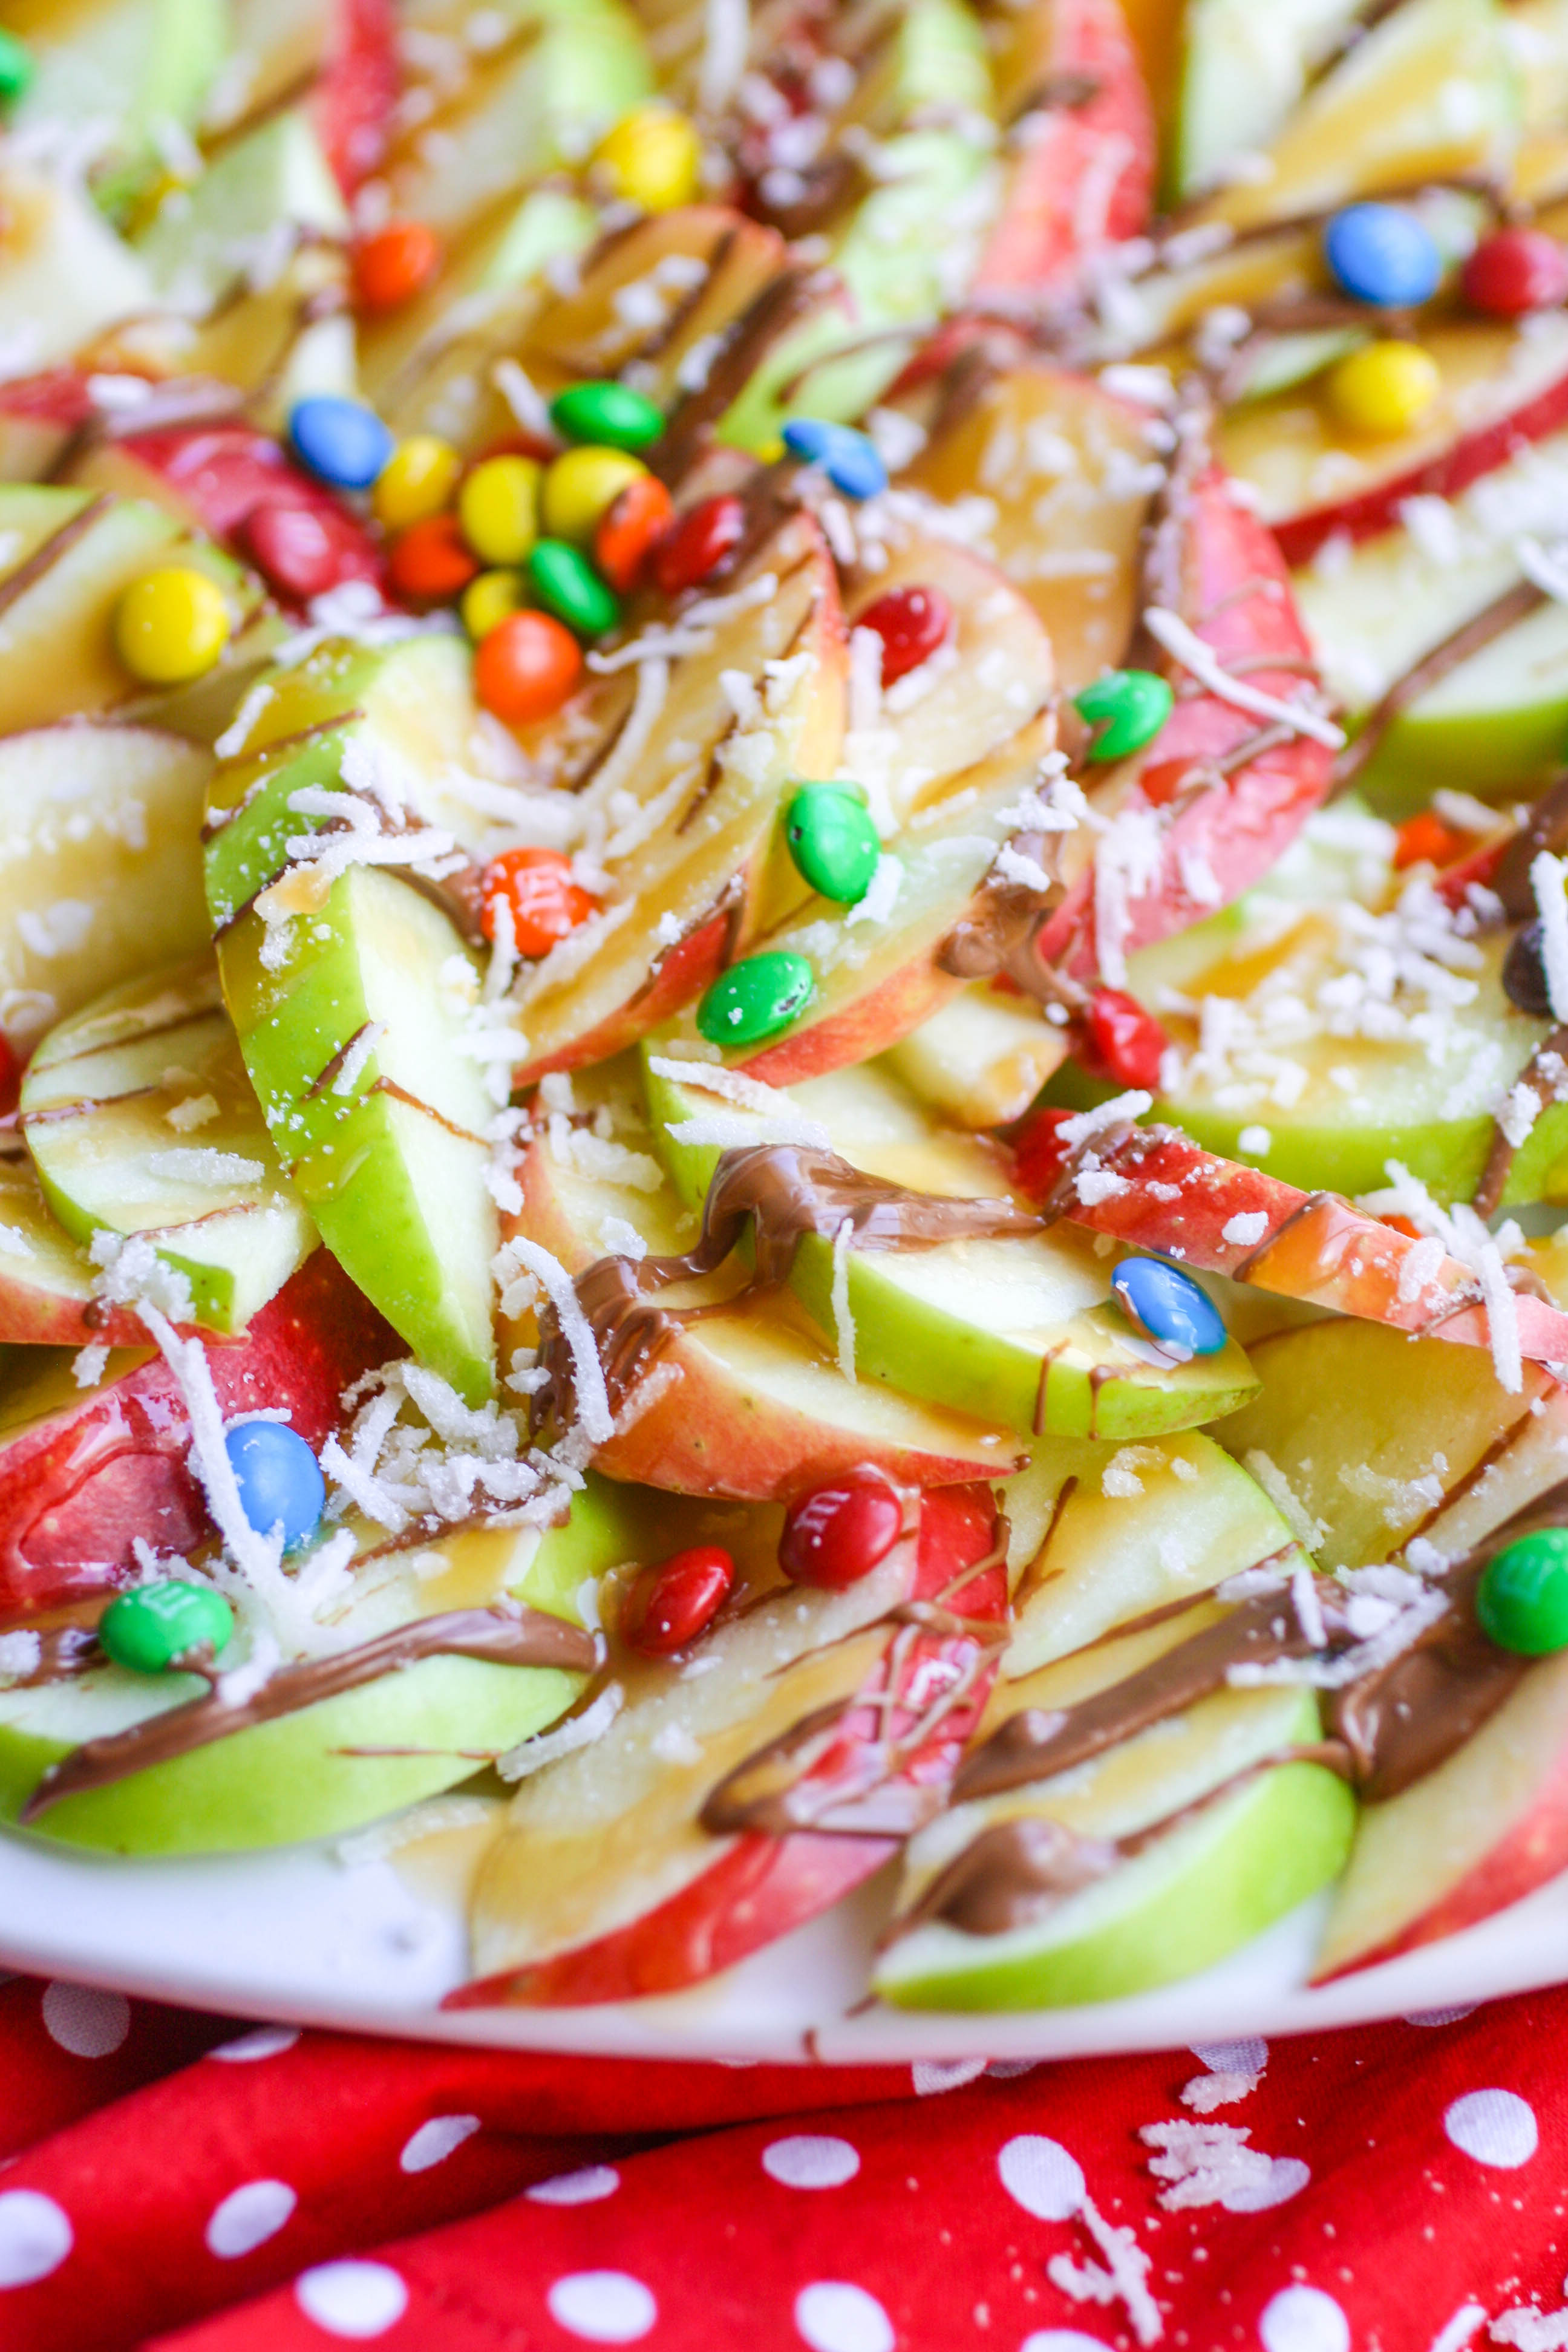 Apple nachos with chocolate & caramel drizzle are tasty and fun to serve!